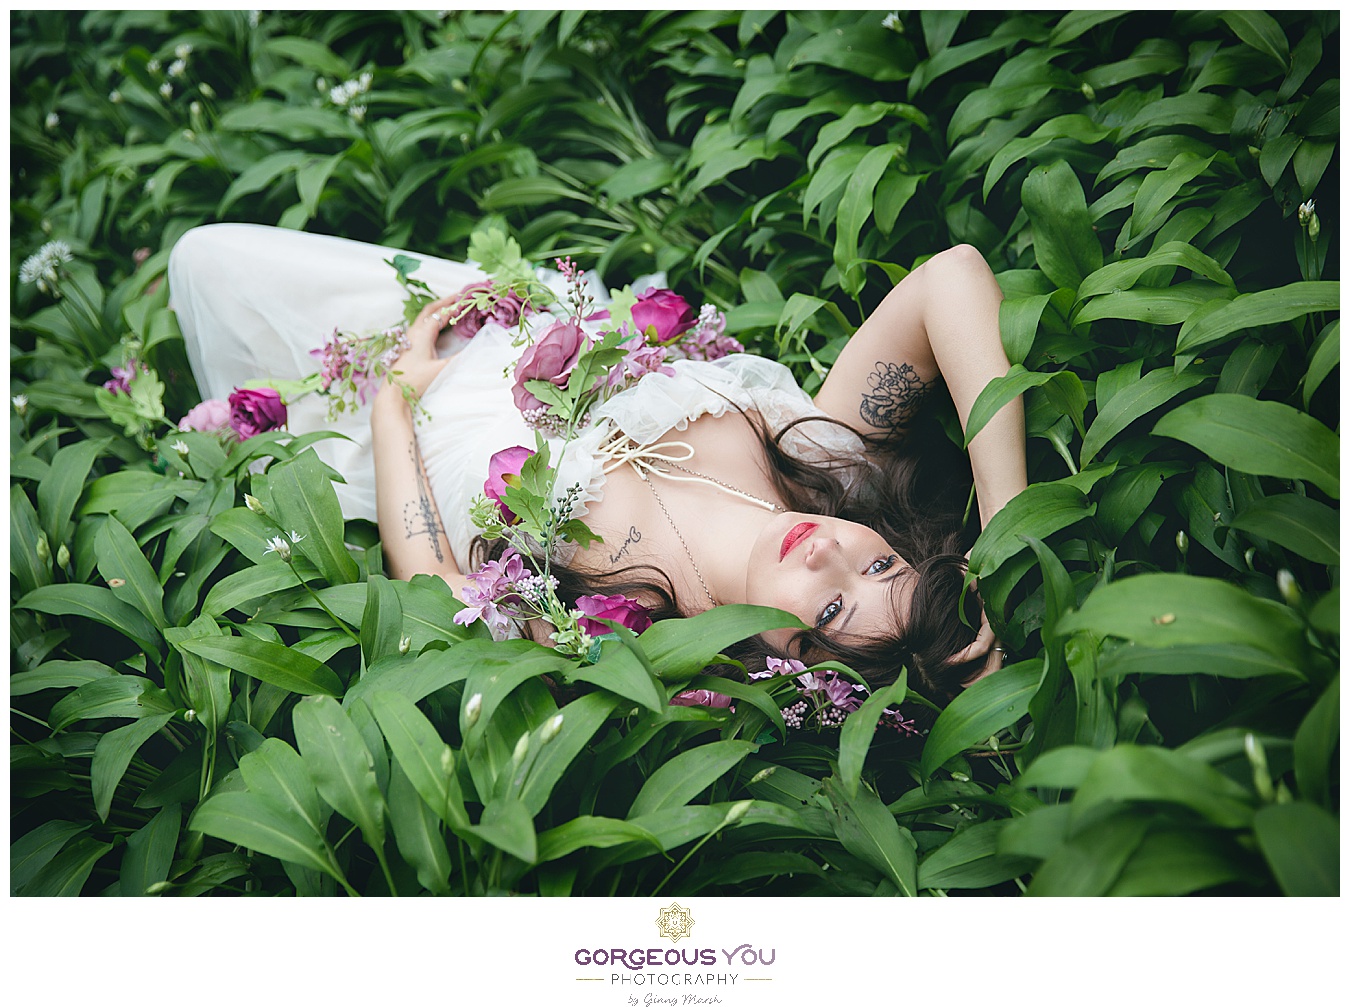 Feminine white tulle dress, lying in a bed of green wild garlic with pink flowers | Divine feminine goddess boudoir photoshoot | Gorgeous You Photography | North Yorkshire